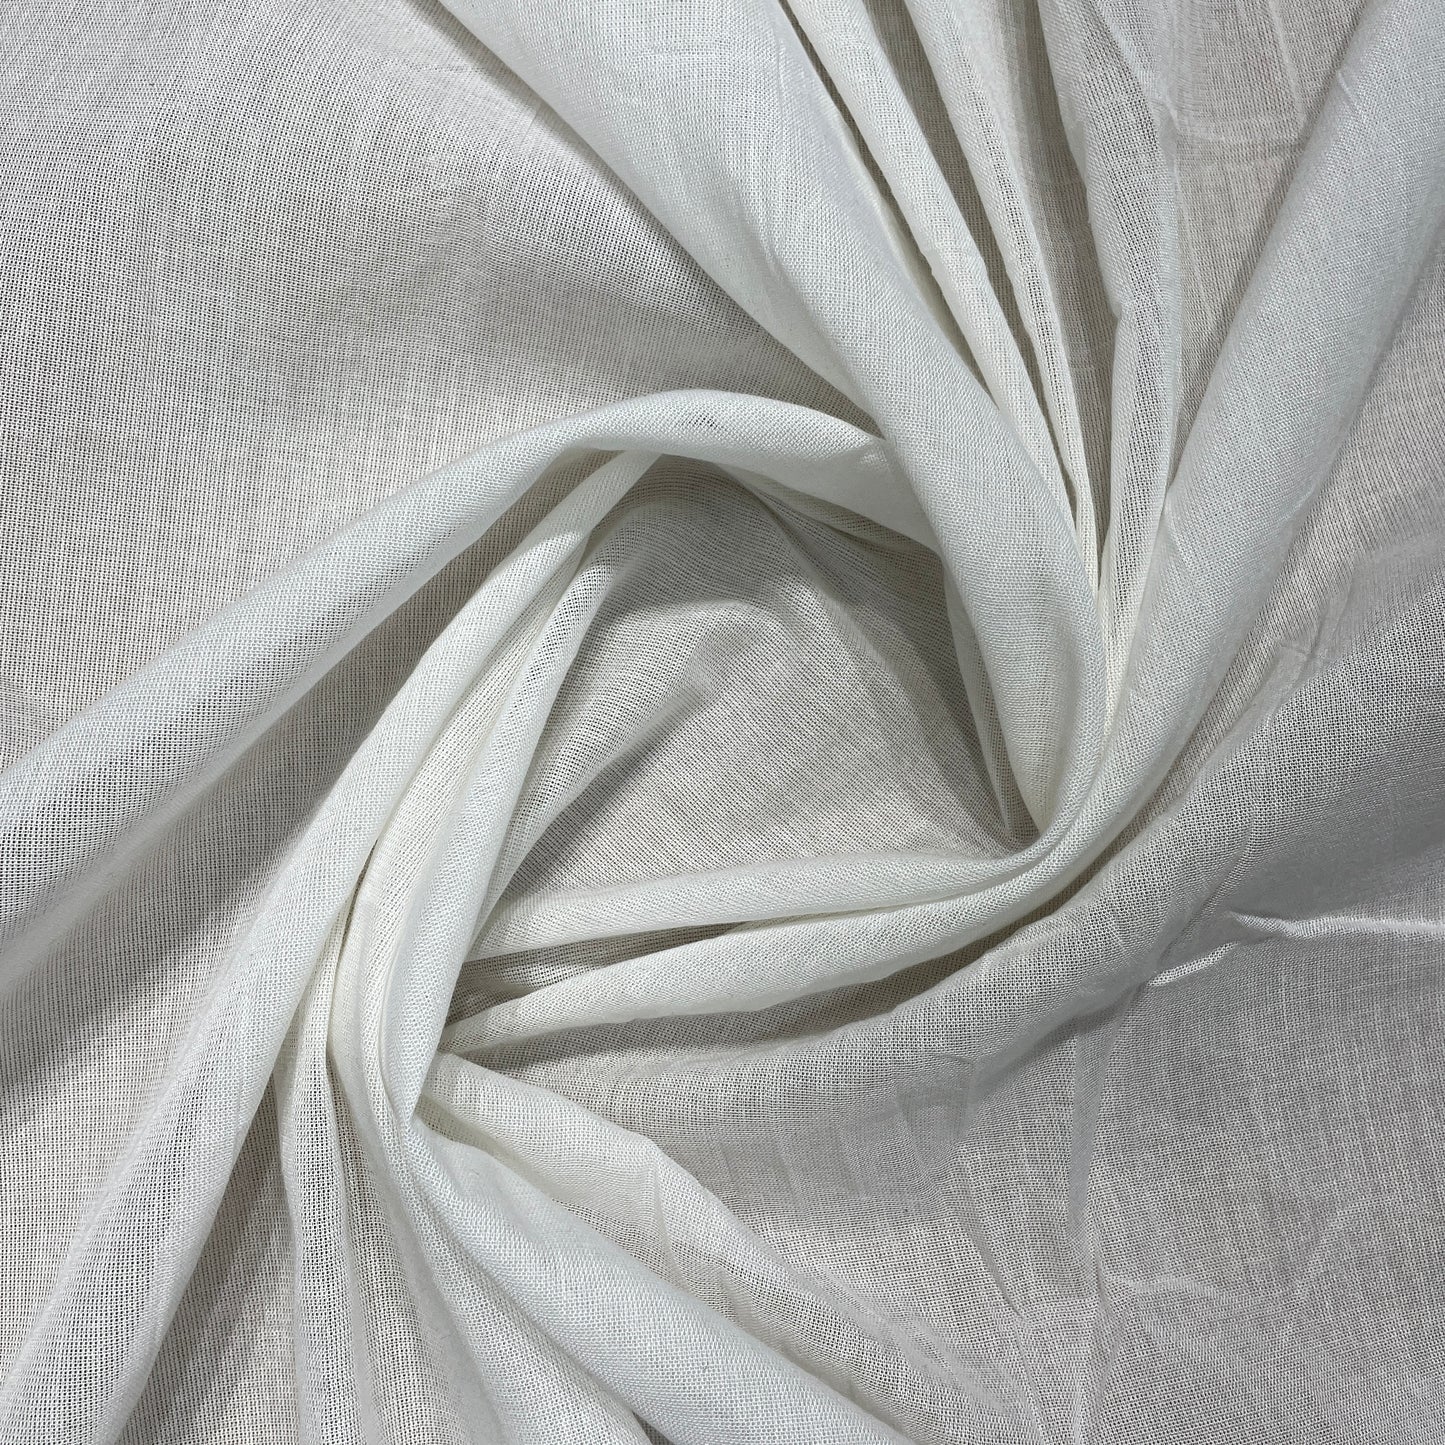 Off White 30x30HT/68x46-63" Dyeable Rayon Crepe Ecoliva Fabric - TradeUNO